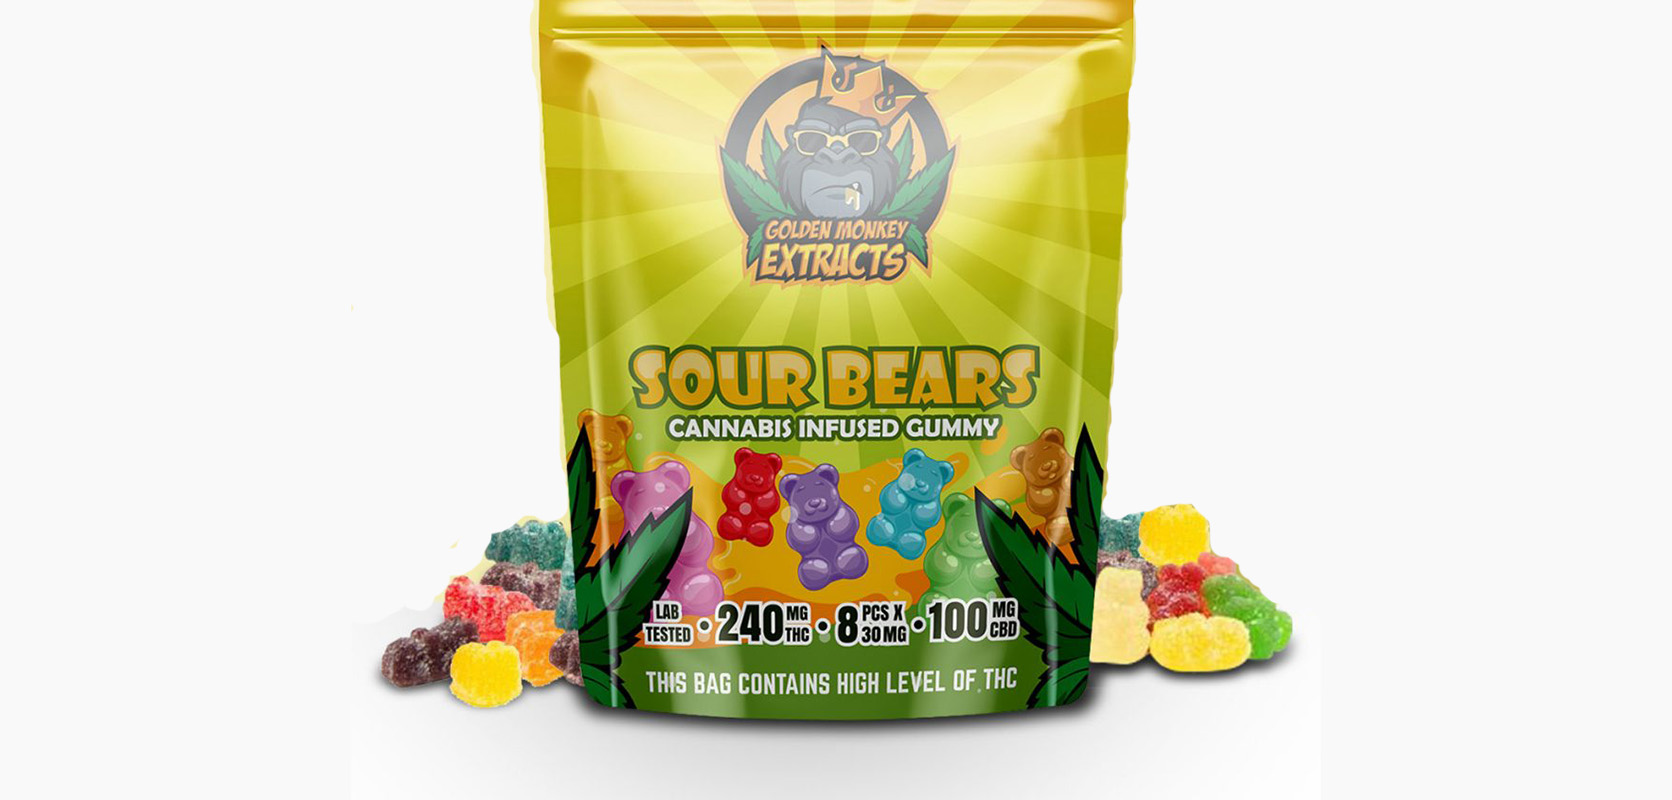 Golden Monkey Extracts Sour Gummy Bears 240mg THC.